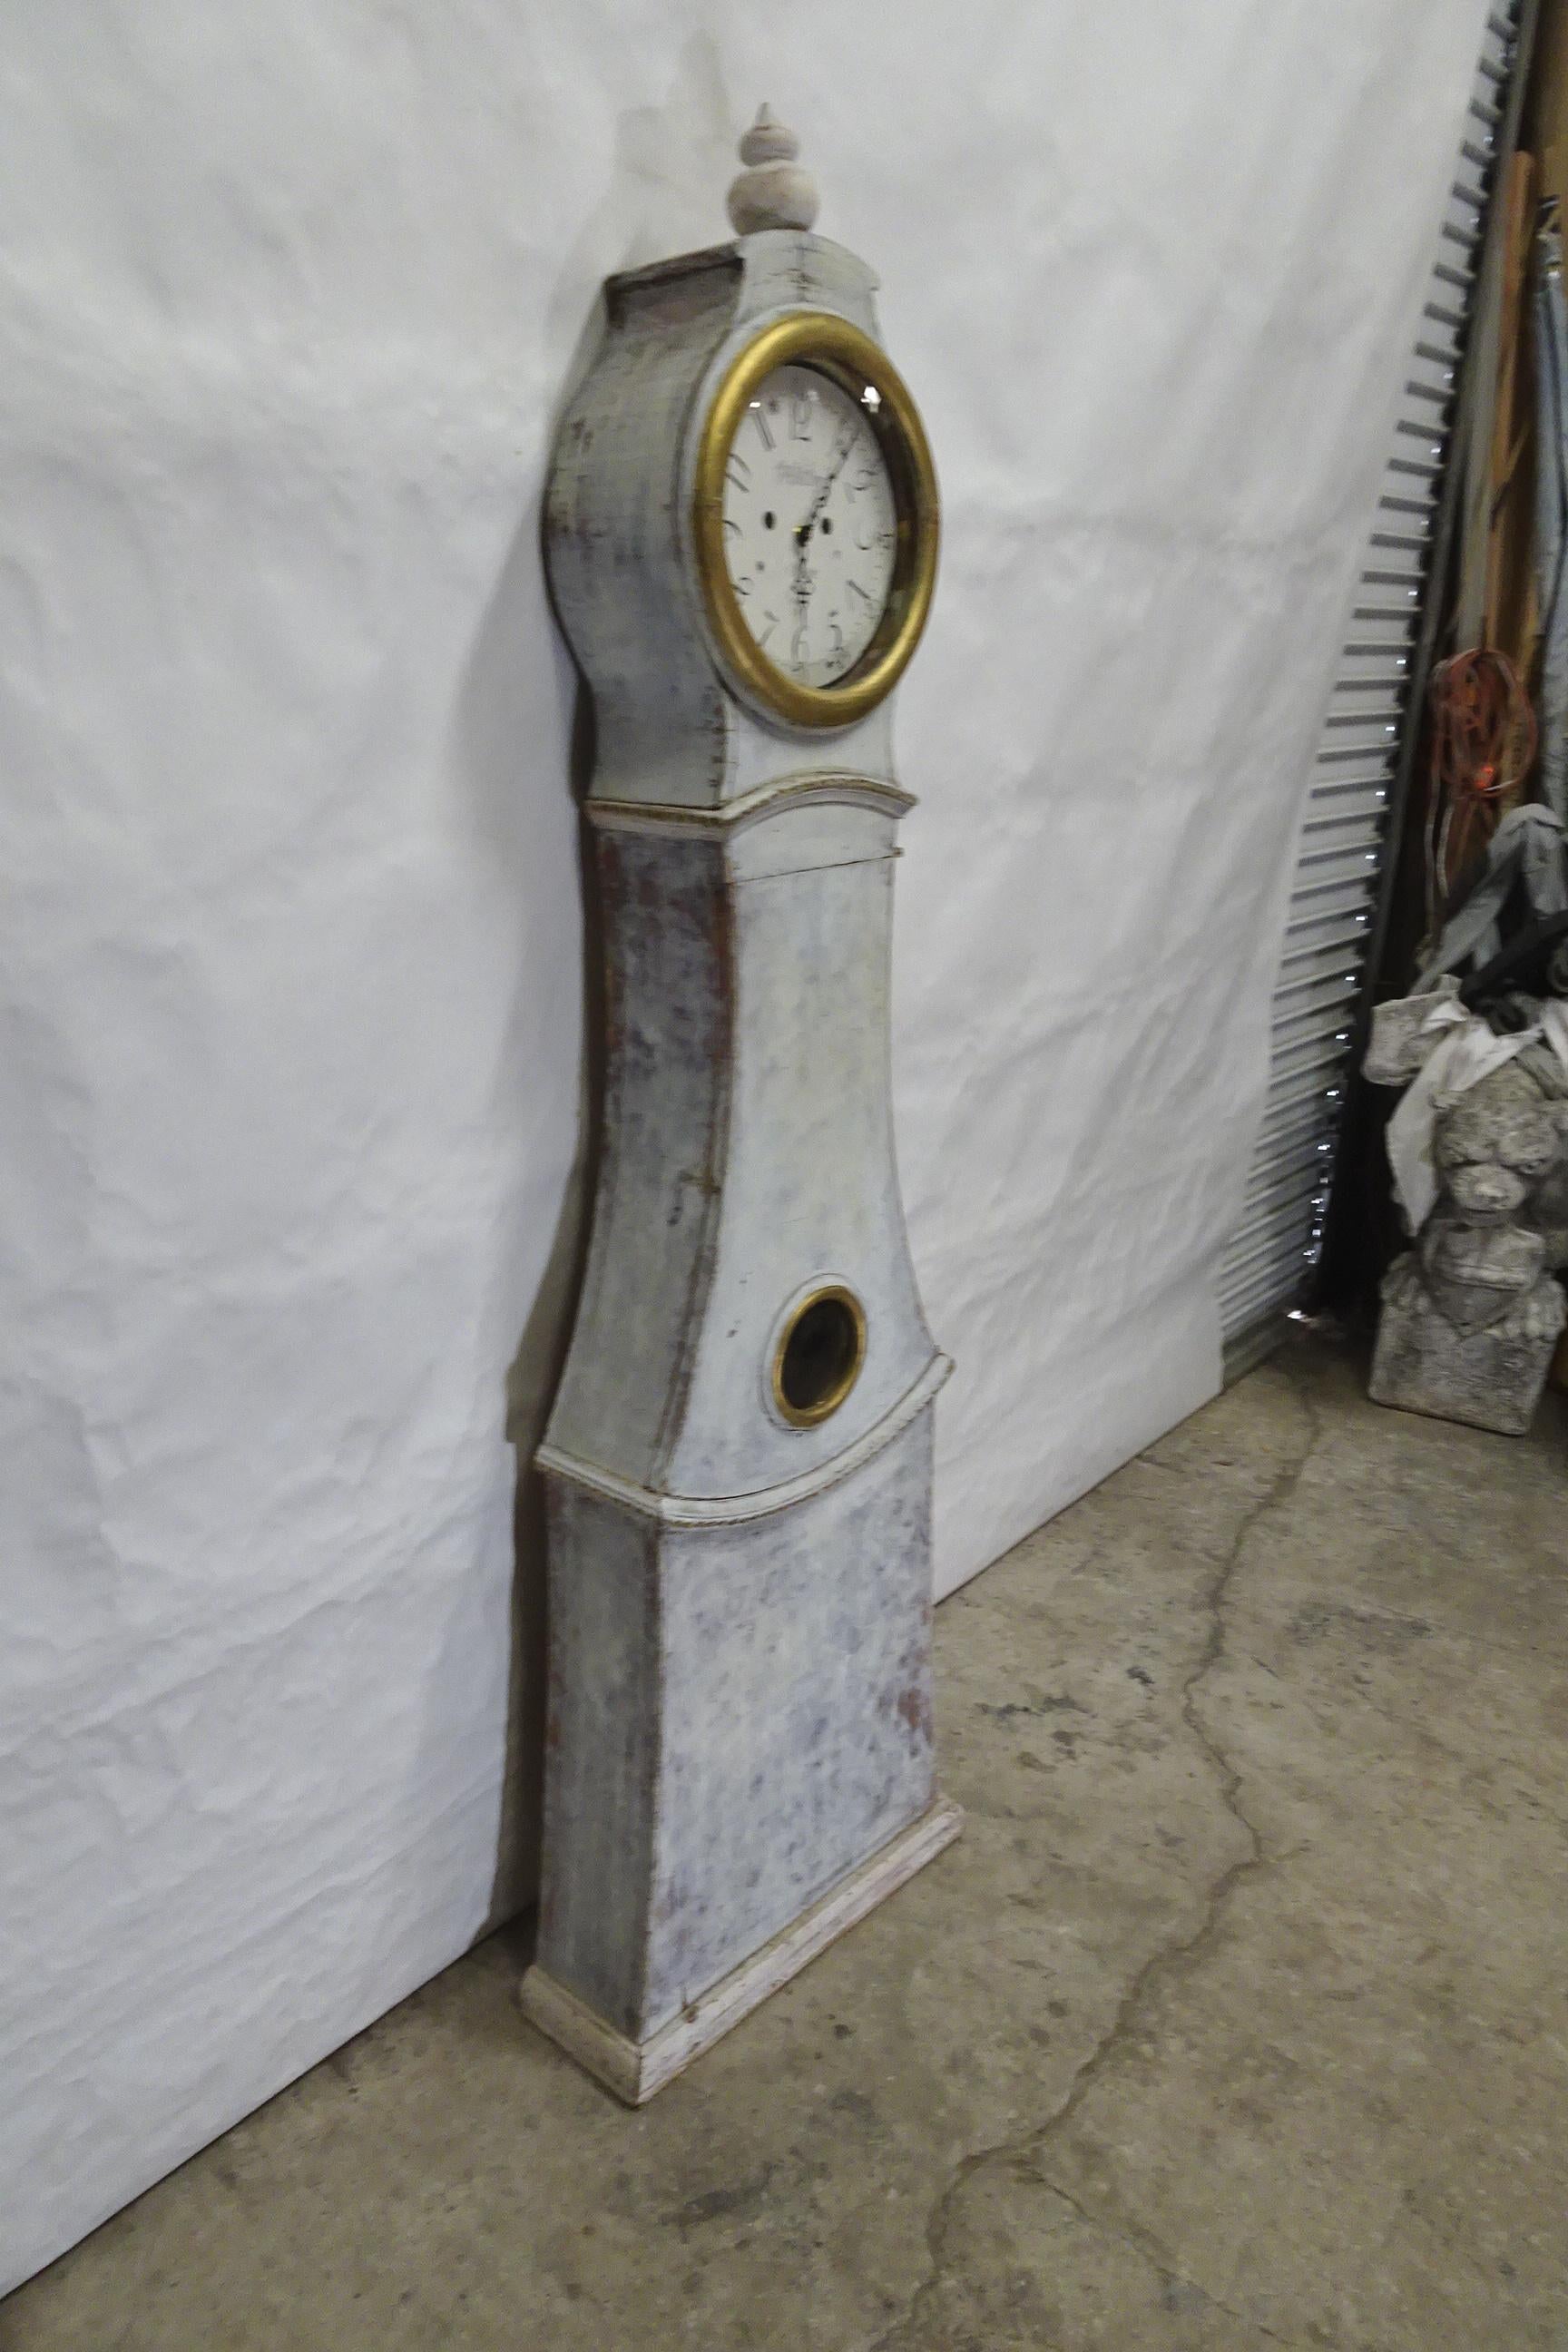 This is a Swedish Mora Clock 100% Original Paint.
the old works have been removed and New battery works installed. I do offer the Original works with every clock I sell.